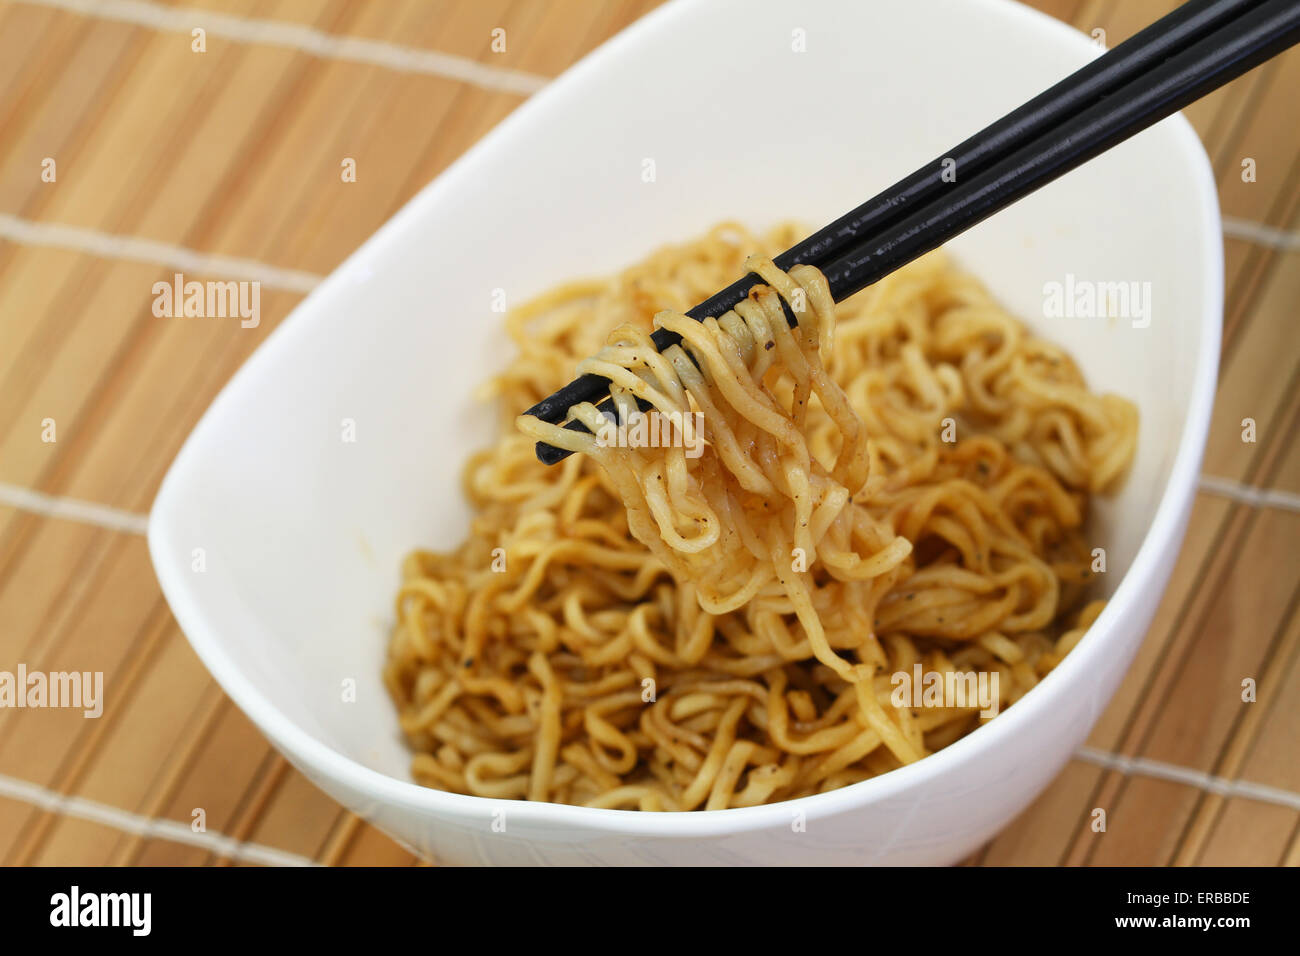 Chinese noodles in bowl and chopsticks on bamboo mat Stock Photo